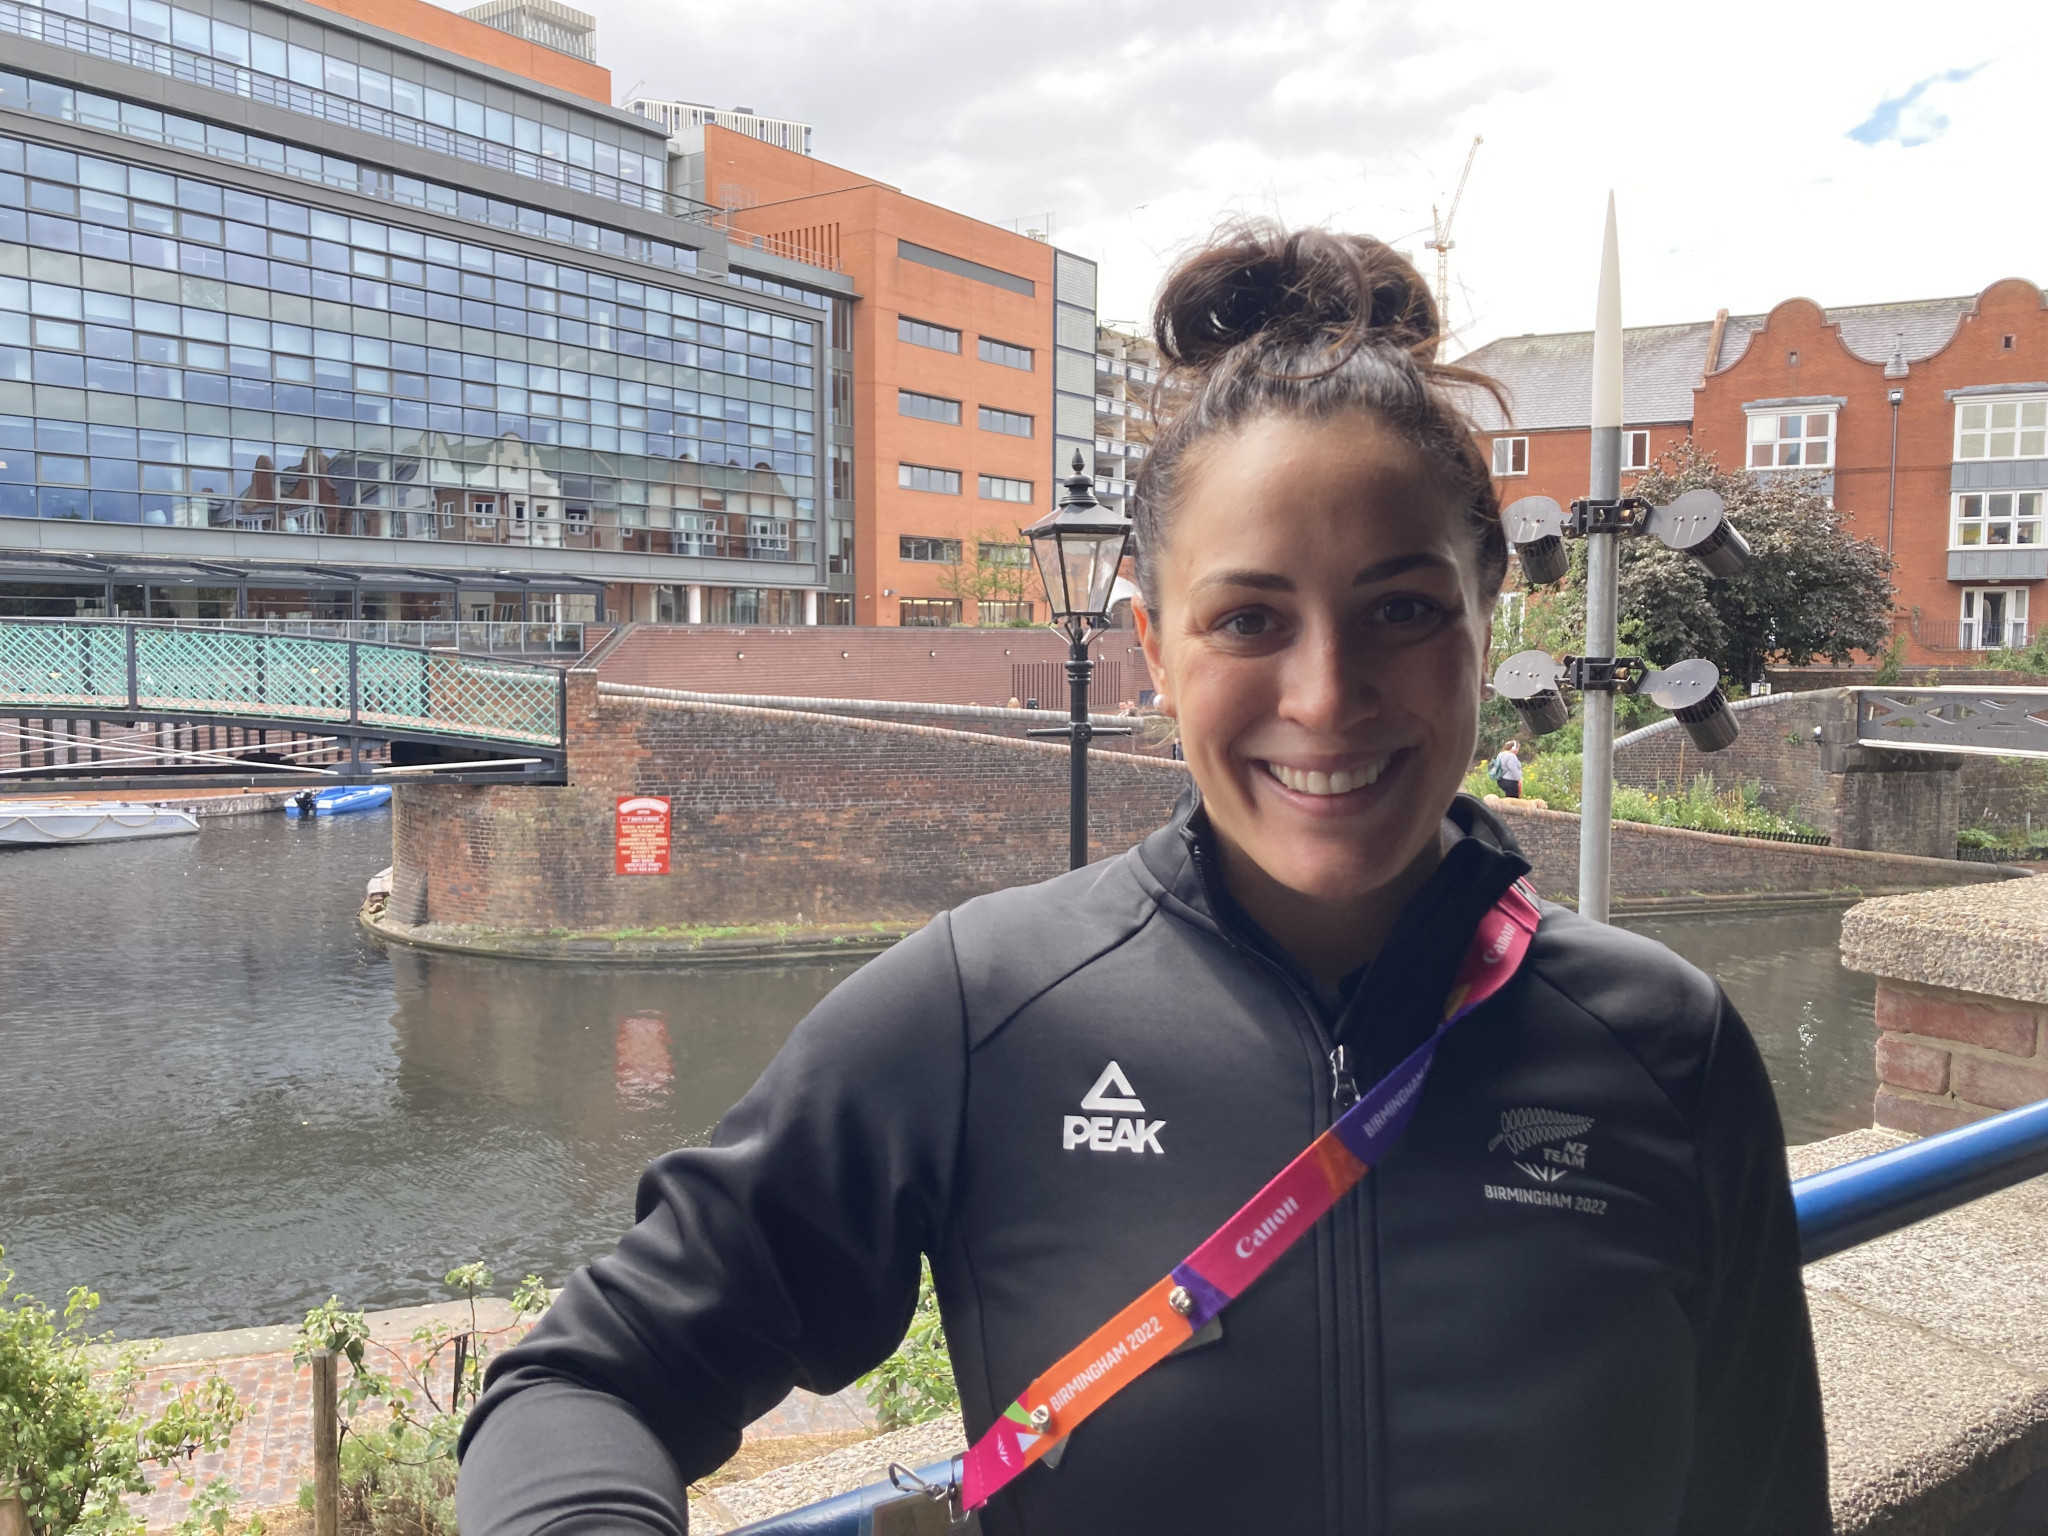 Pascoe aiming for sole gold at Birmingham 2022 after COVID-hit preparations